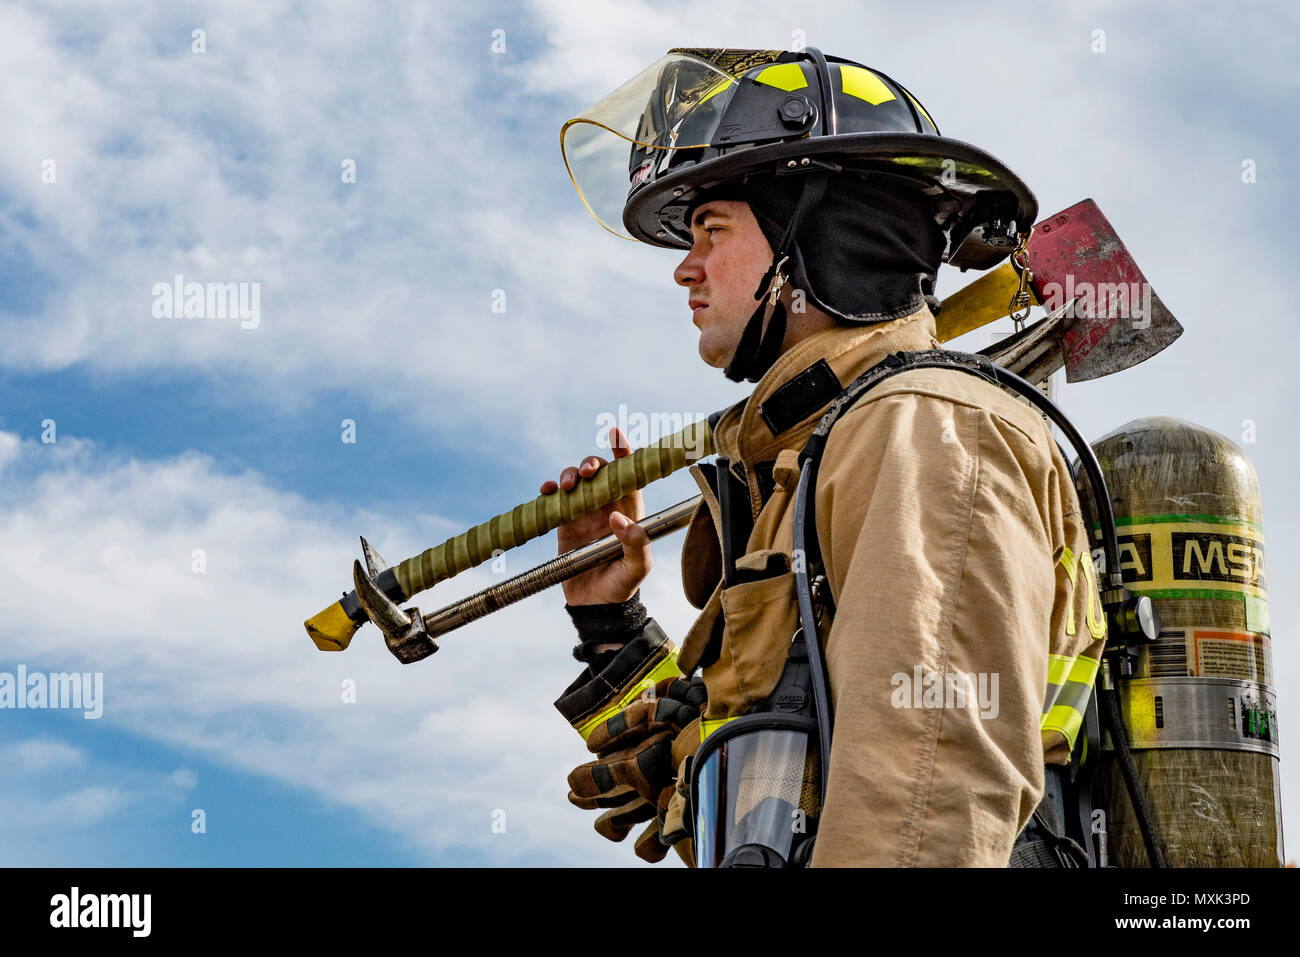 A Firefighter From The 374th Civil Engineer Squadron Waits To Enter A Simulated Collapsed Building During A Natural Disaster Exercise On Nov 15 16 At Yokota Air Base Japan The Focus Of